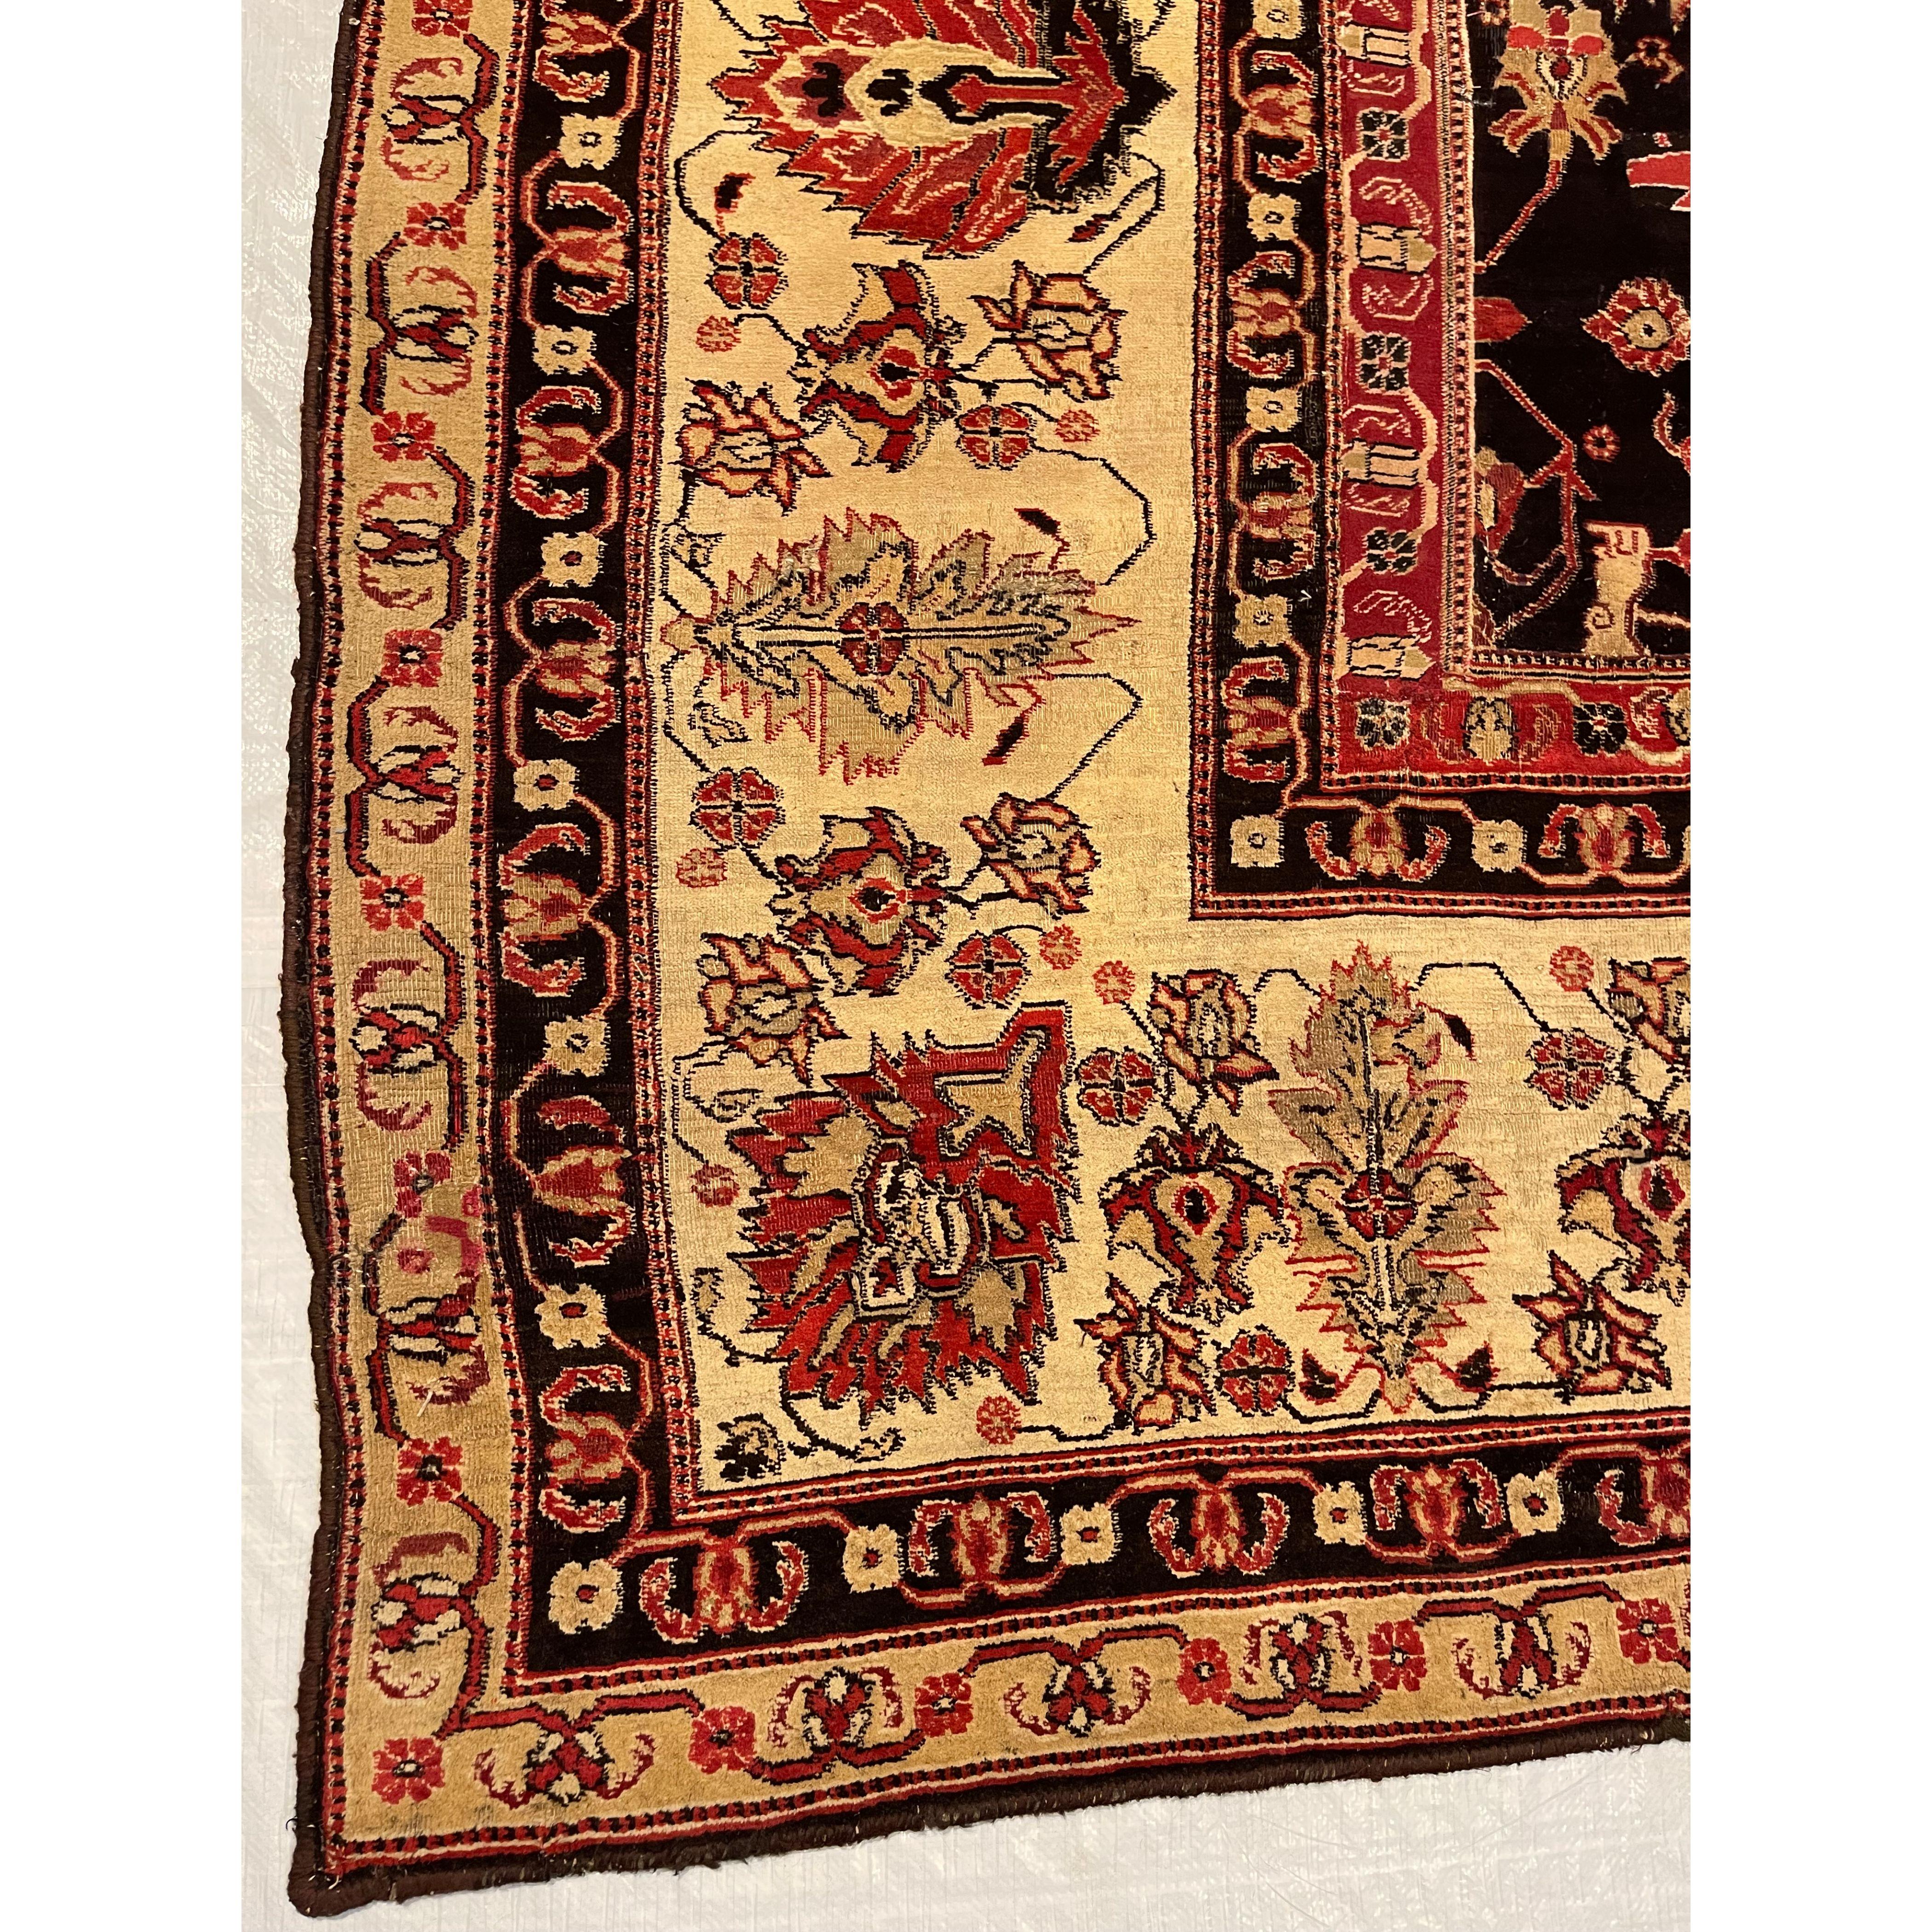 Antique Agra Rugs Agra has been a major center of area rug and carpet production since the great period of Mughal art in the sixteenth and seventeenth centuries. When the carpet industry was revived there under British rule in the nineteenth